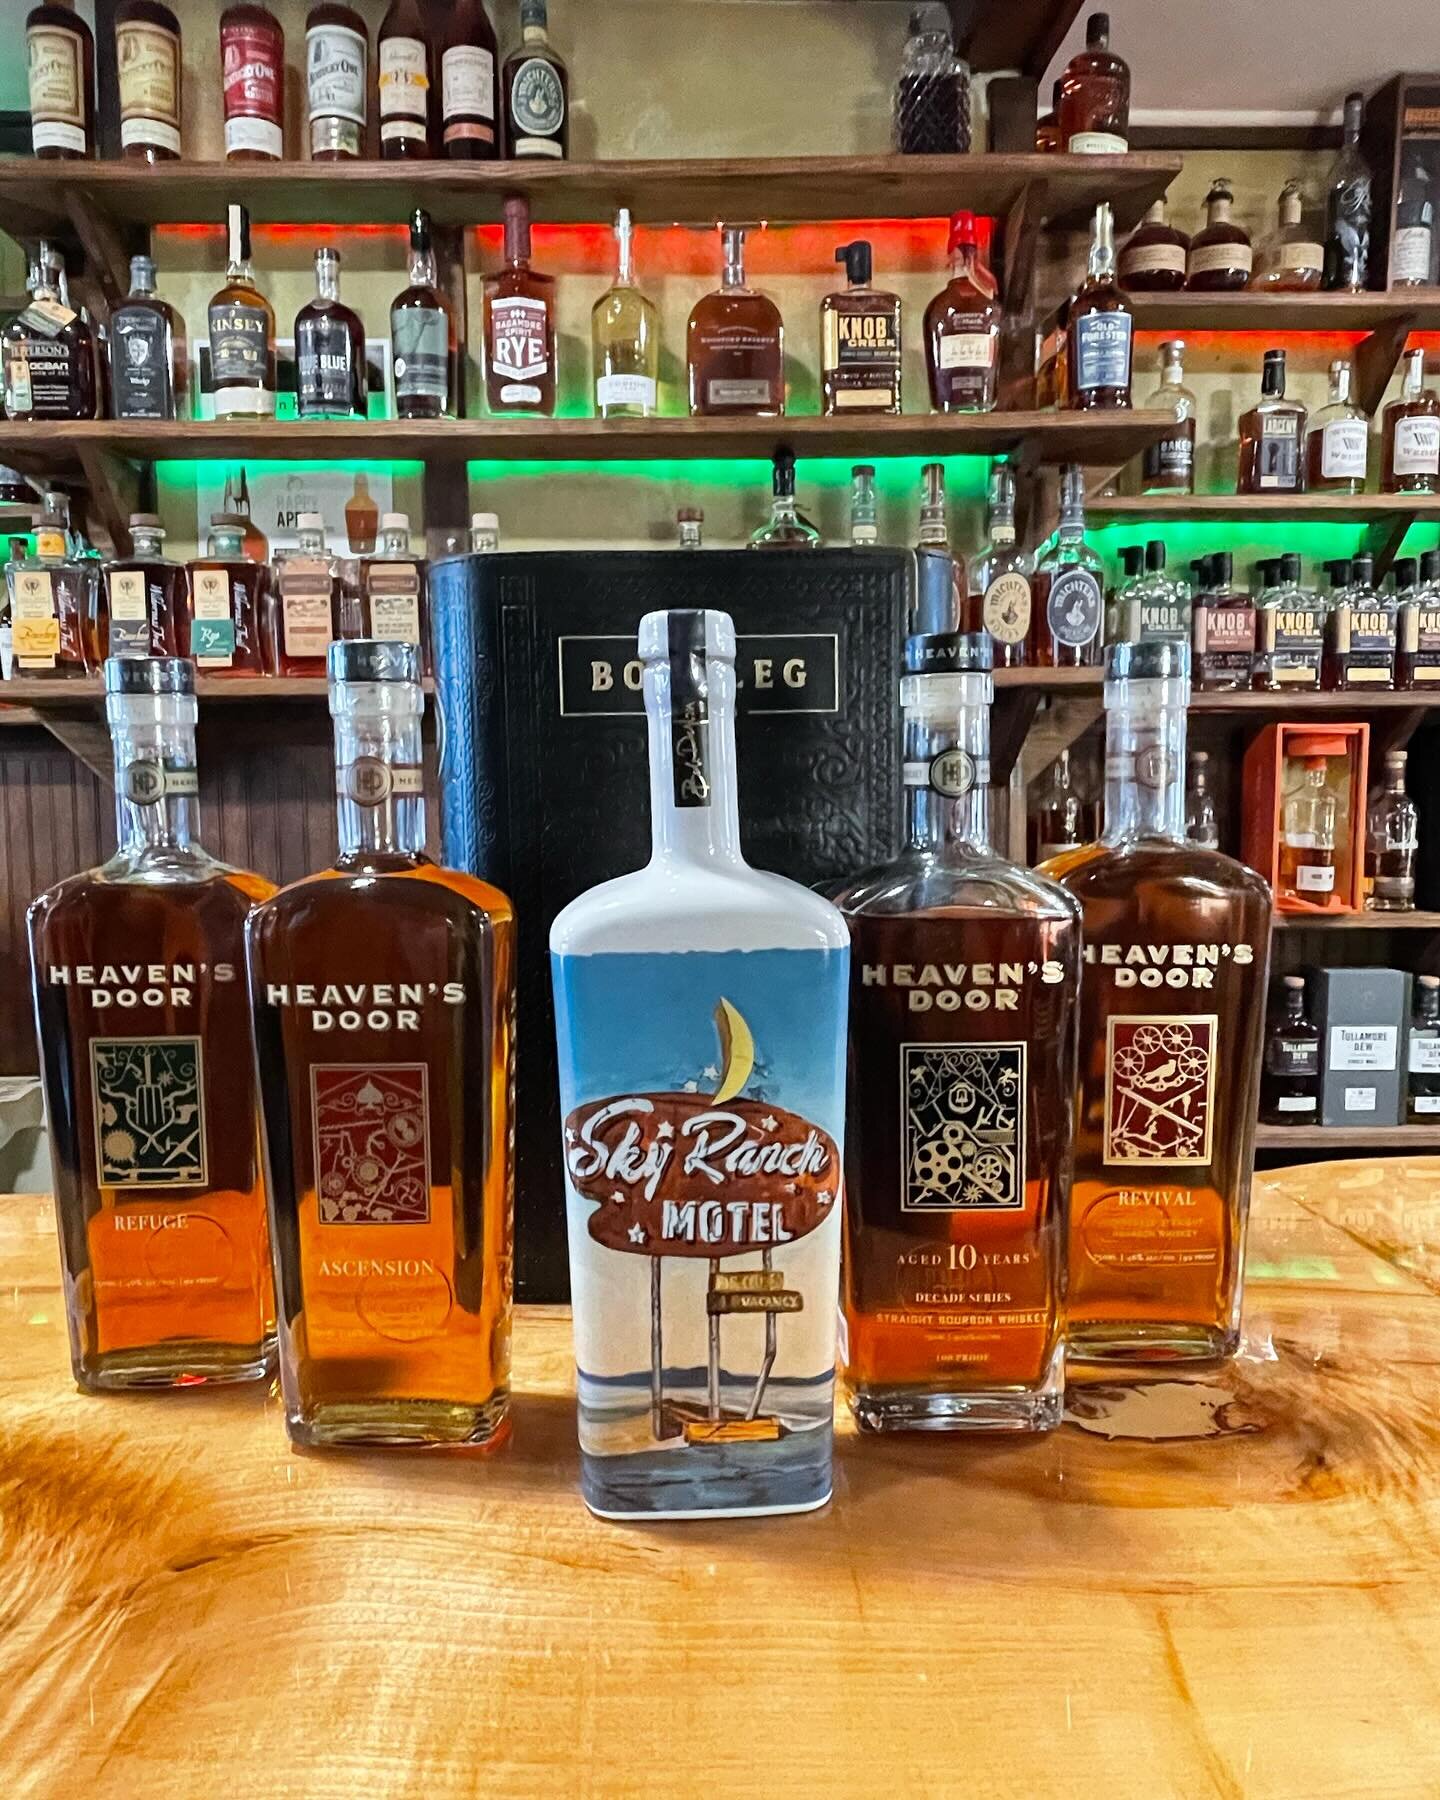 OPEN TONIGHT! Our whiskey bar is open Thursday-Saturday since we are closed Christmas Eve. On special this week is Heaven&rsquo;s Door! All whiskey from Heaven&rsquo;s Door is 15% off!